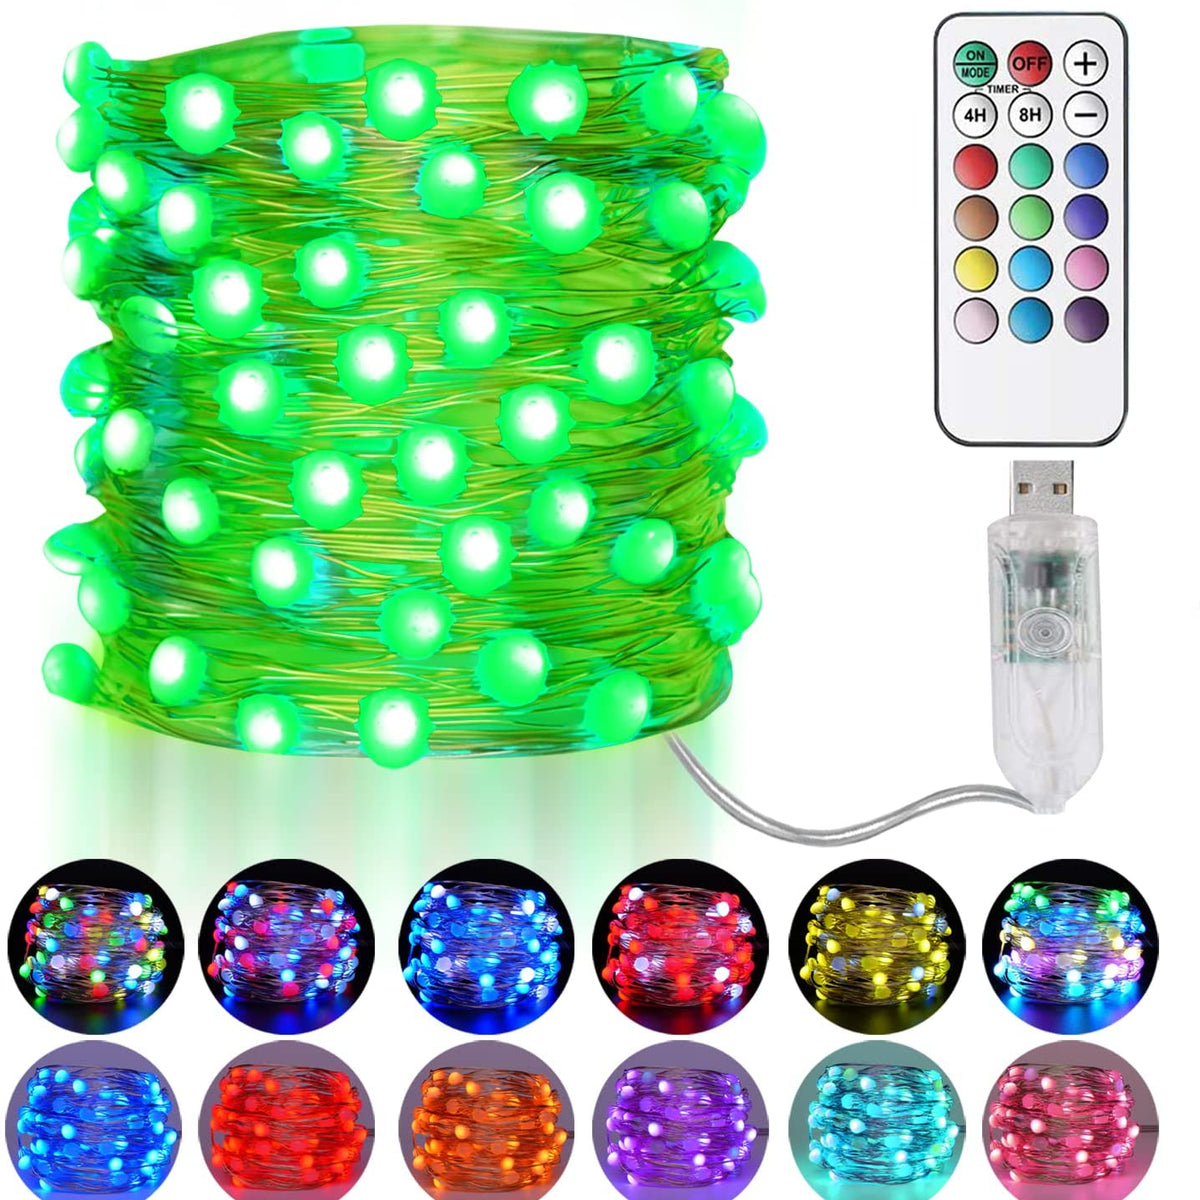 1 Pack 100/200LED RGB Linear Light, RGB Halloween Christmas String Lights  Tree Lights With Remote Timer Plug, Color Changing Christmas Tree Lights, In